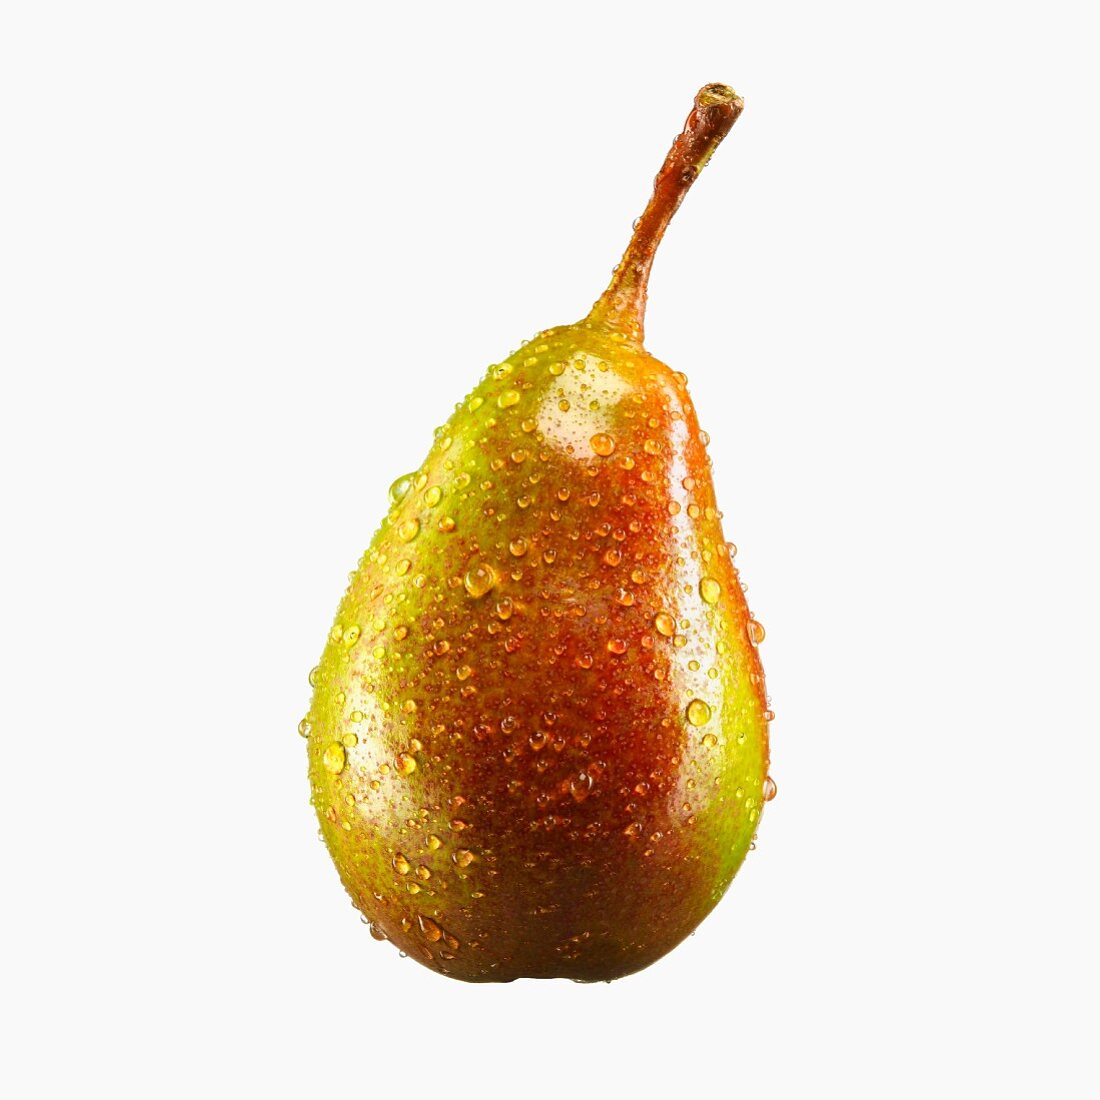 A pear with drops of water